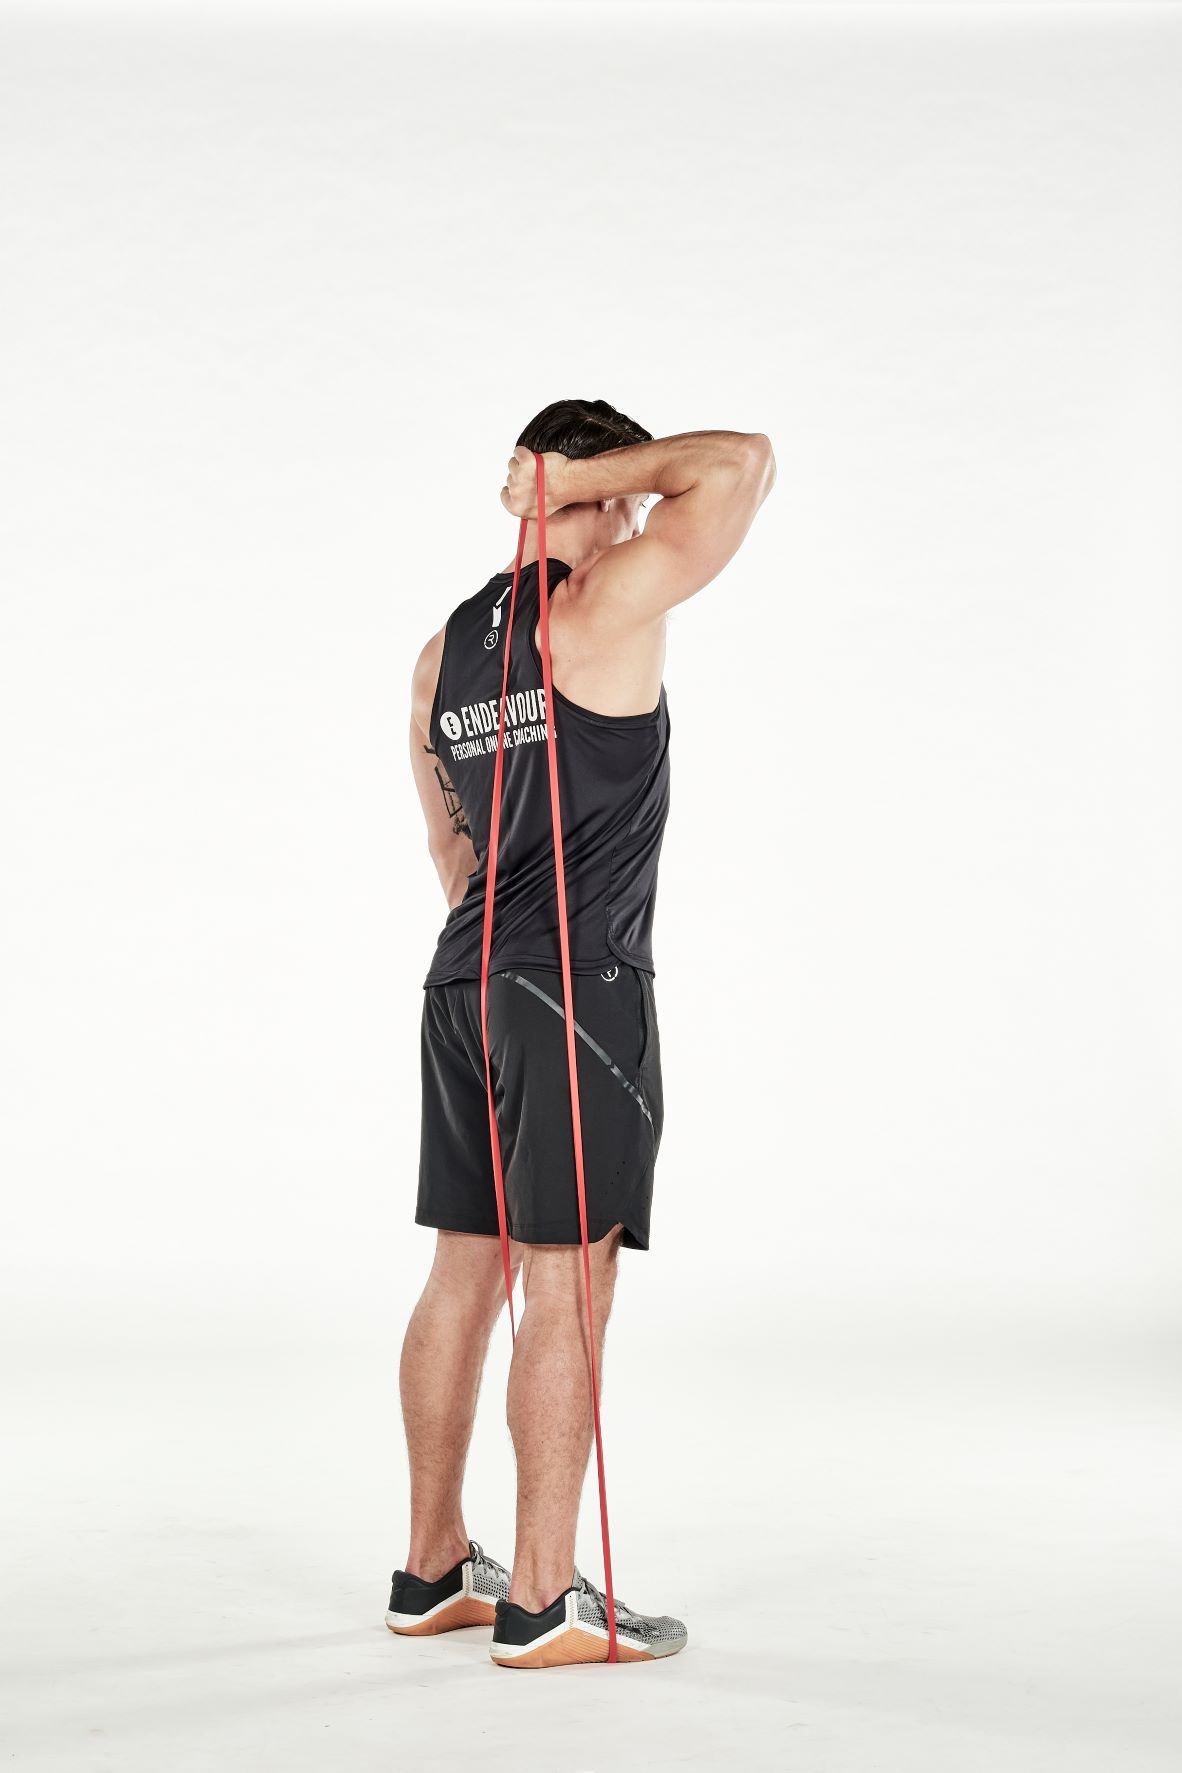 man demonstrating step one of single arm triceps extension; standing tall, his arm reaches behind his head to hold a resistance band that's held under one foot; his arm is bent; he wears a black fitness vest, black shorts and trainers